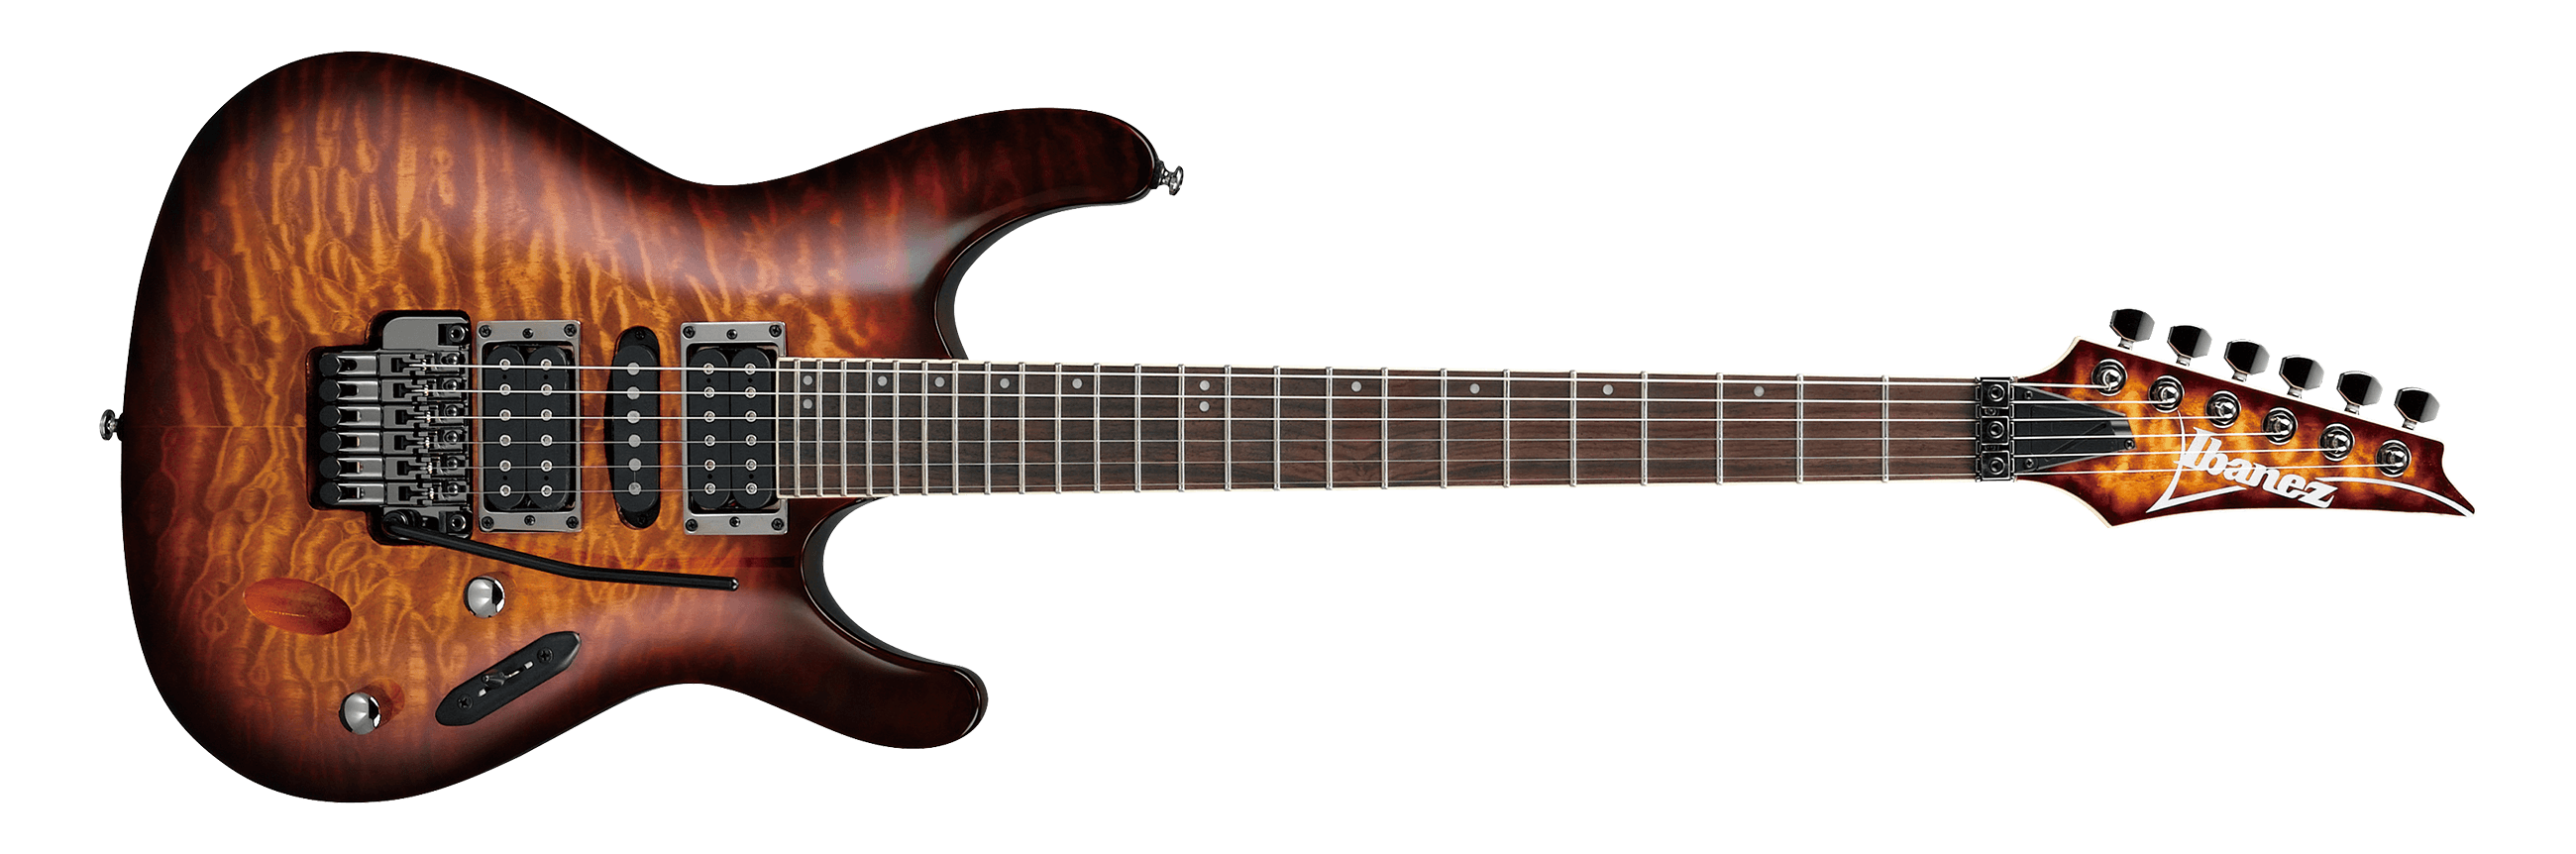 S670QM | S | ELECTRIC GUITARS | PRODUCTS | Ibanez guitars